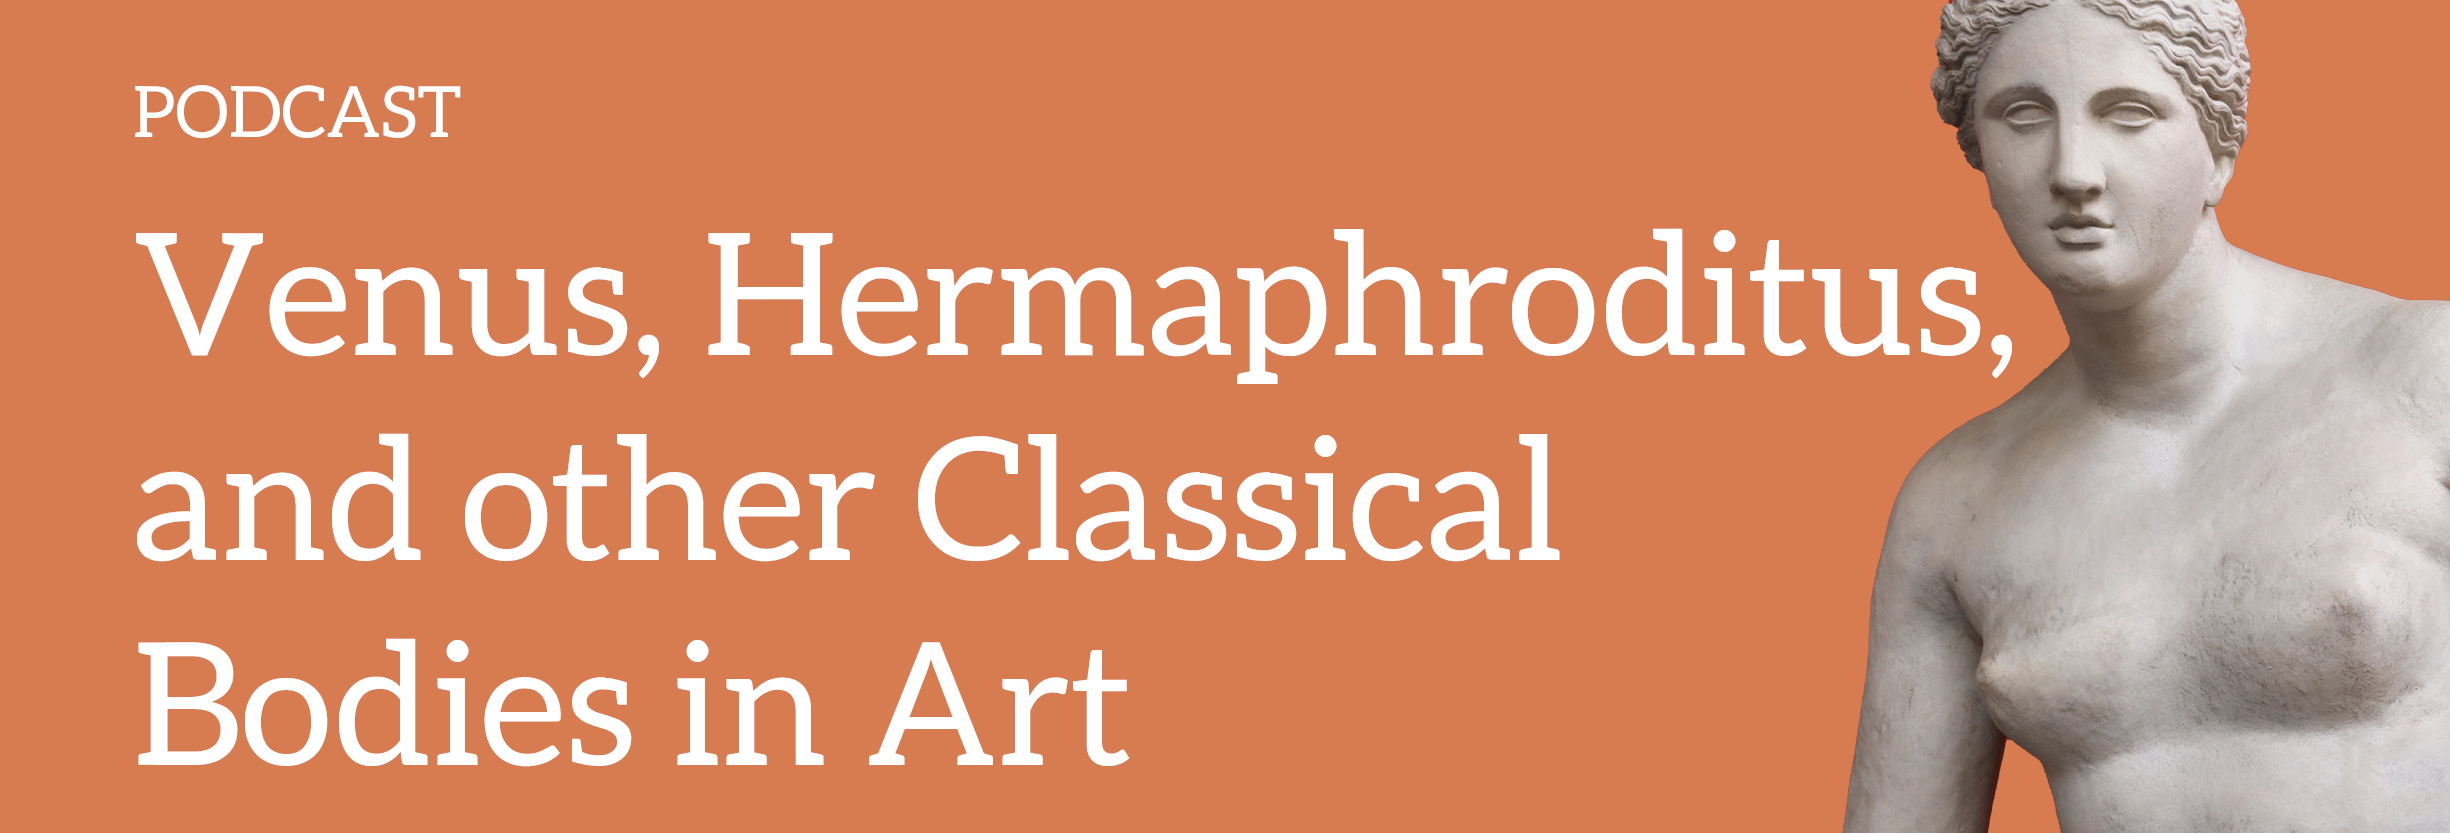 Venus, Hermaphroditus, and other Classical Bodies in Art